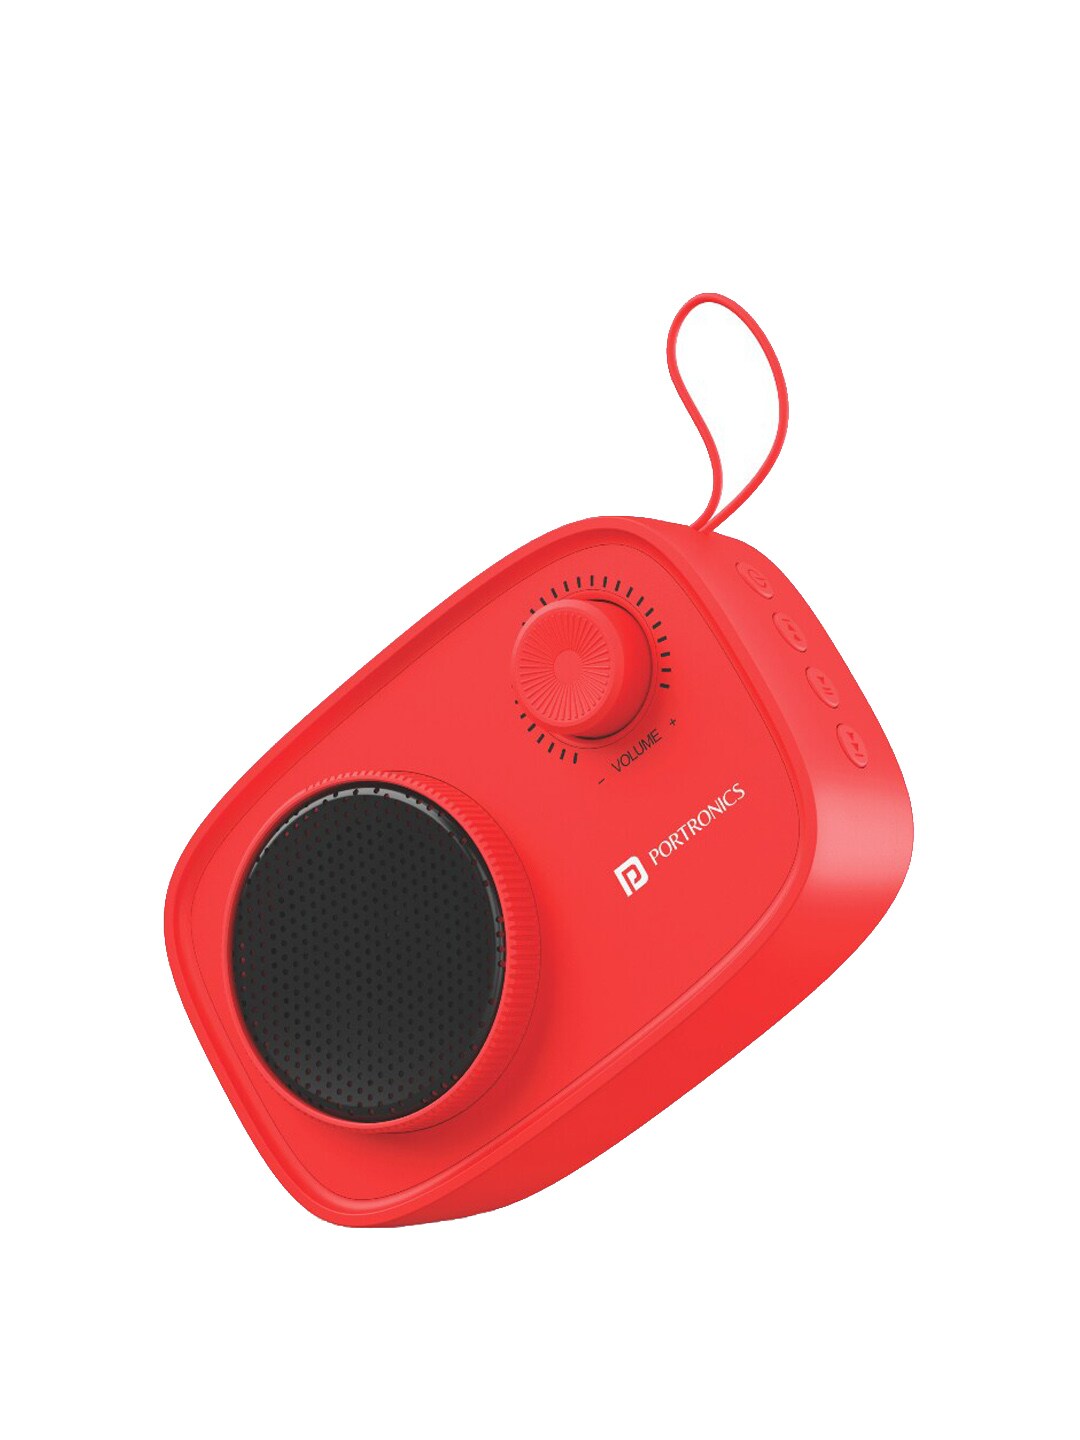 Portronics Pixel 2 Red Wireless Bluetooth Portable Speaker Price in India